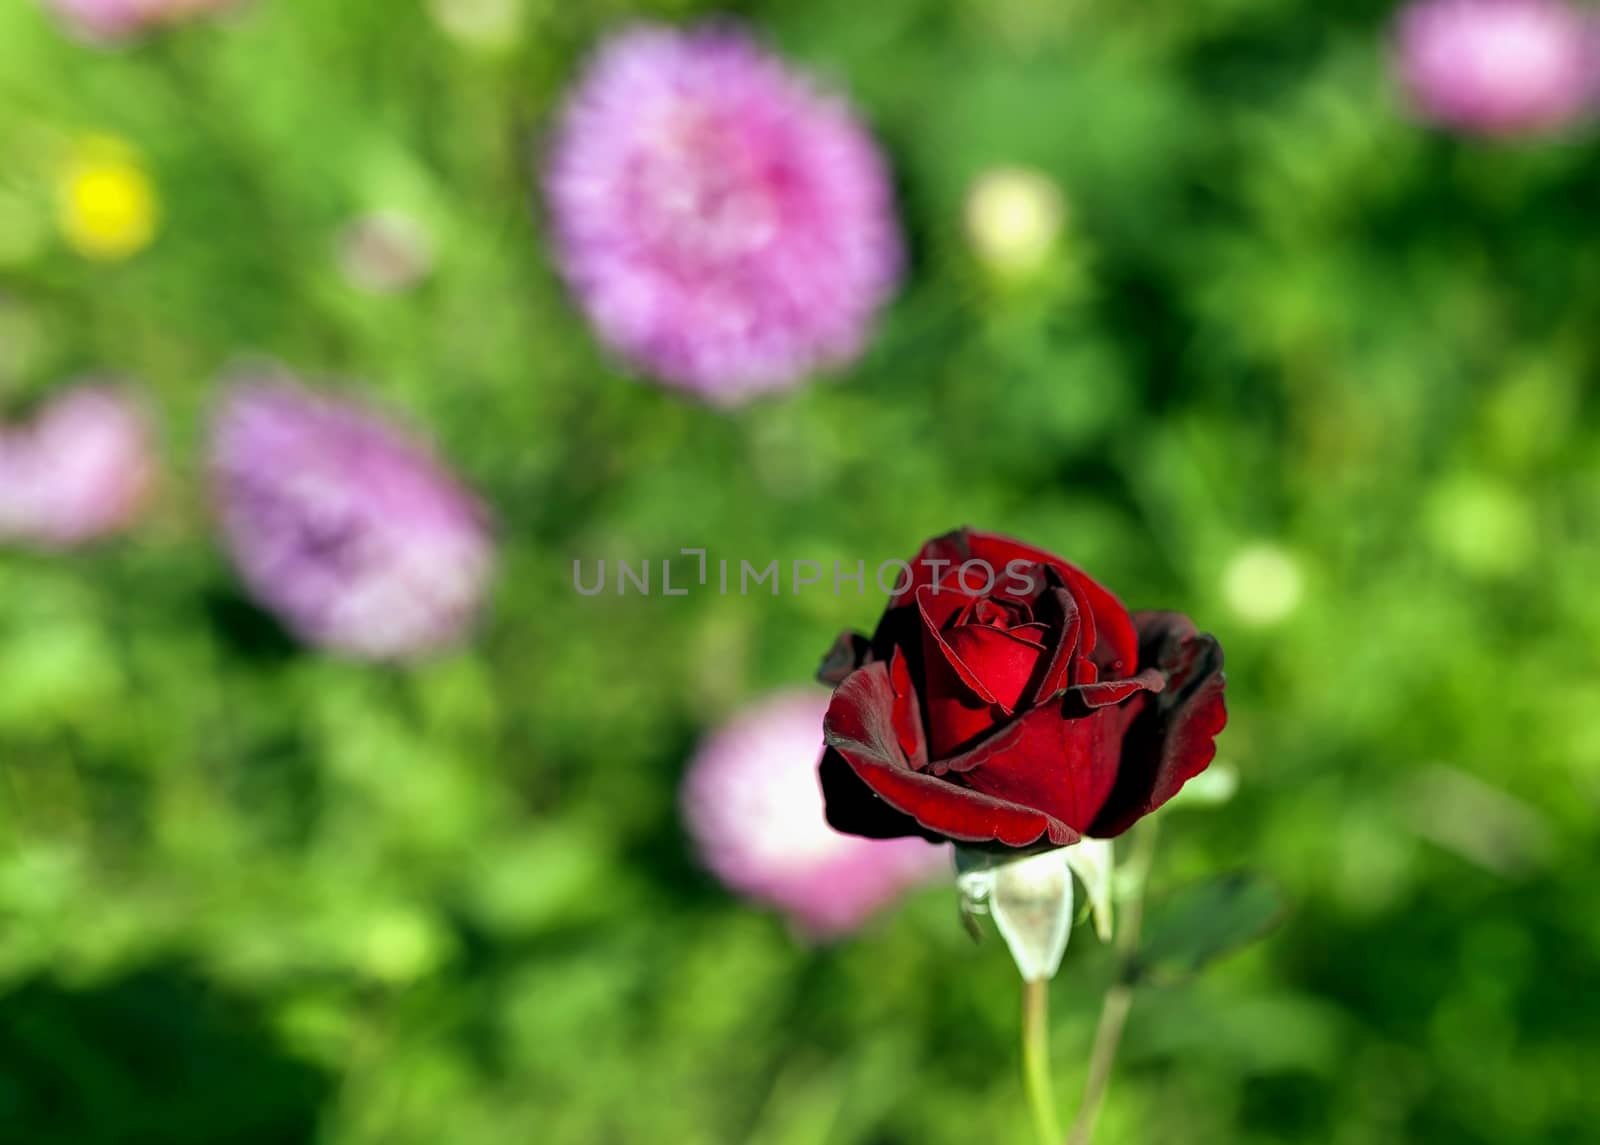 red rose on the background of natural greenery illuminated by the morning sun